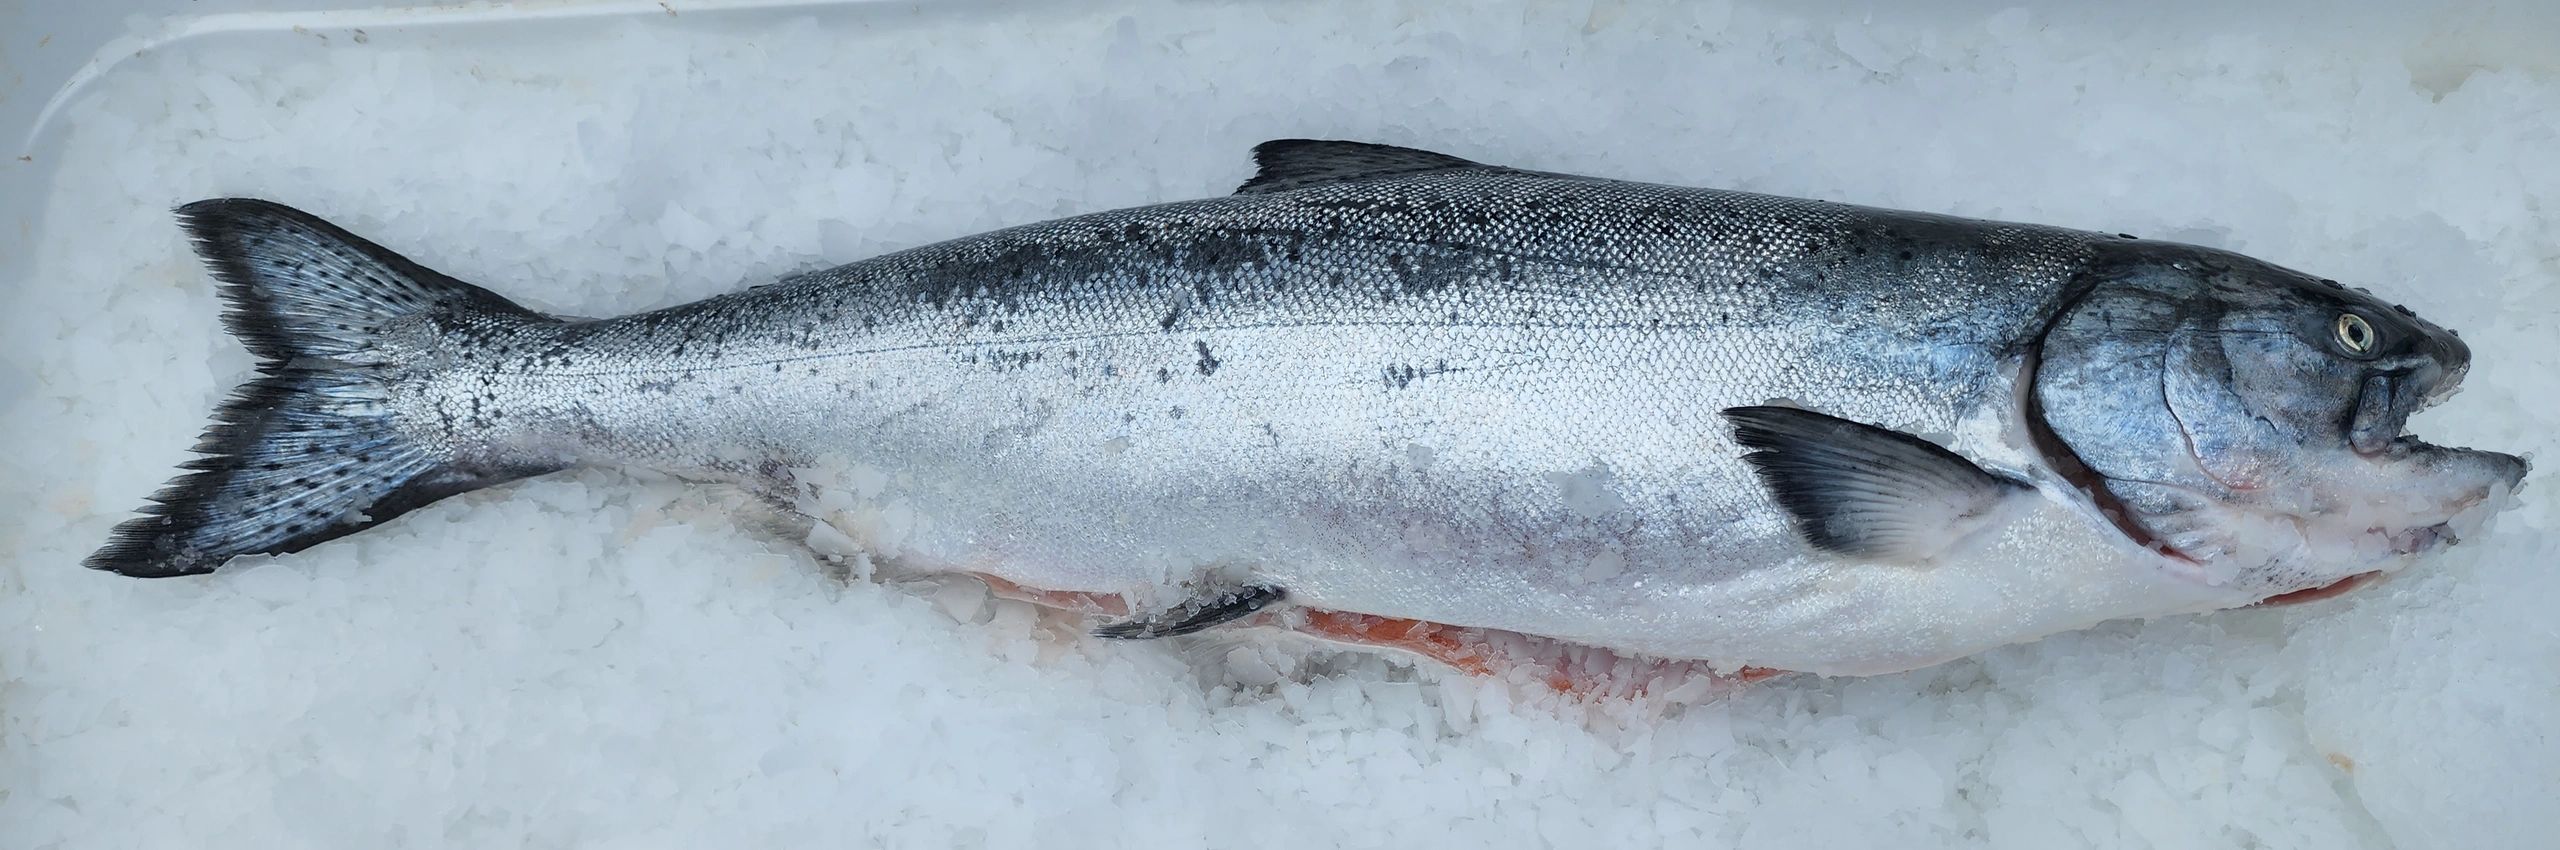 Chinook King Salmon - Generally red, but occasionally white kings are available.

- Small (4-7 lb) $